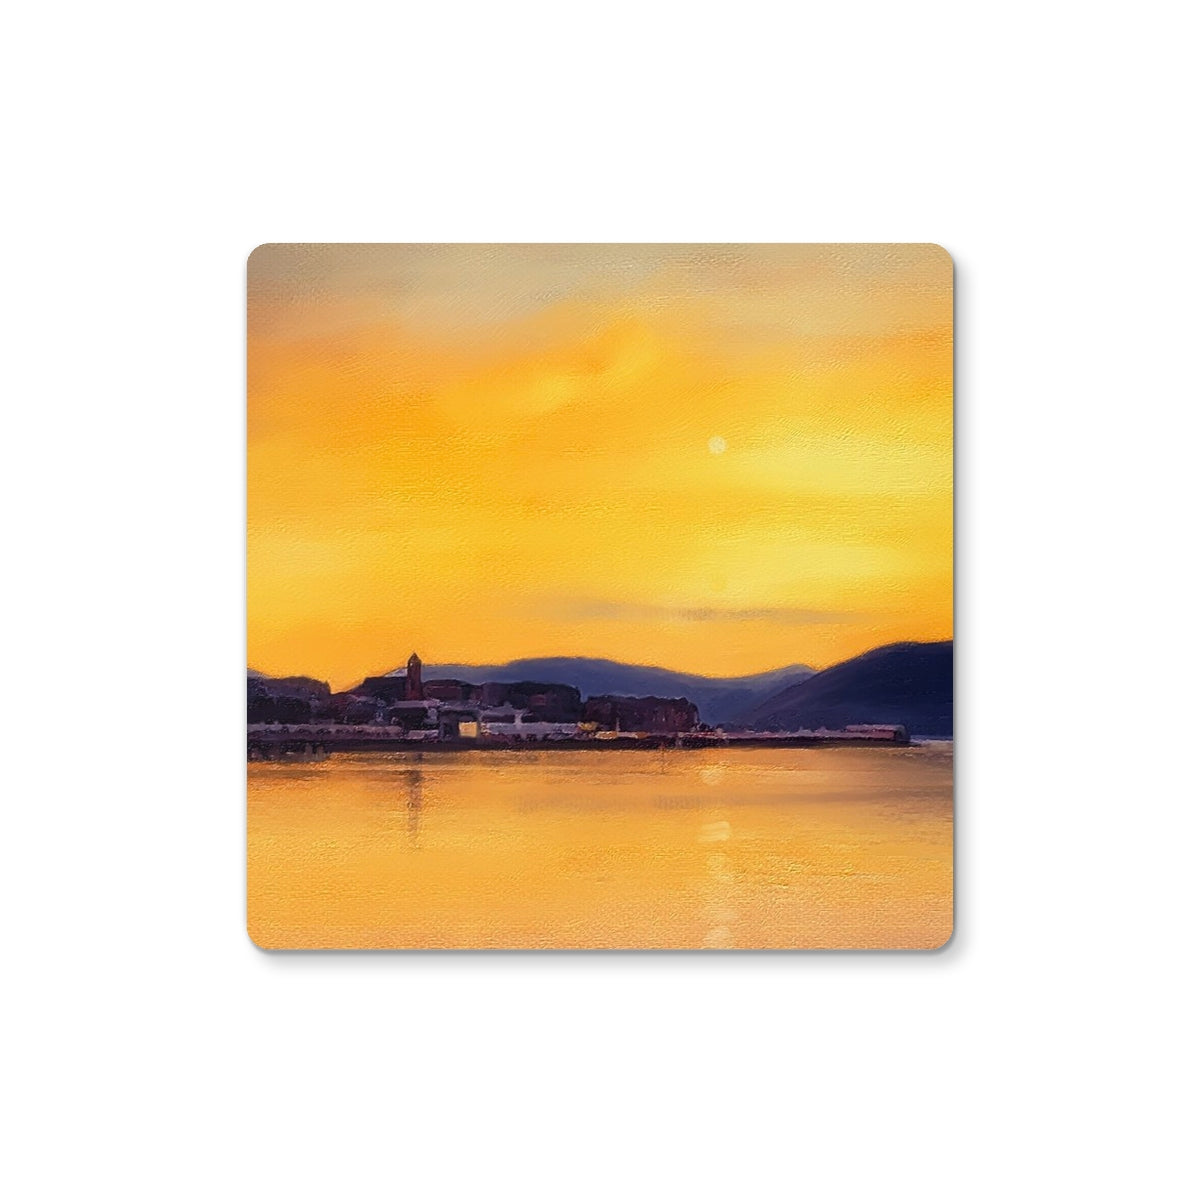 Gourock From Cardwell Bay Art Gifts Coaster-Coasters-River Clyde Art Gallery-2 Coasters-Paintings, Prints, Homeware, Art Gifts From Scotland By Scottish Artist Kevin Hunter